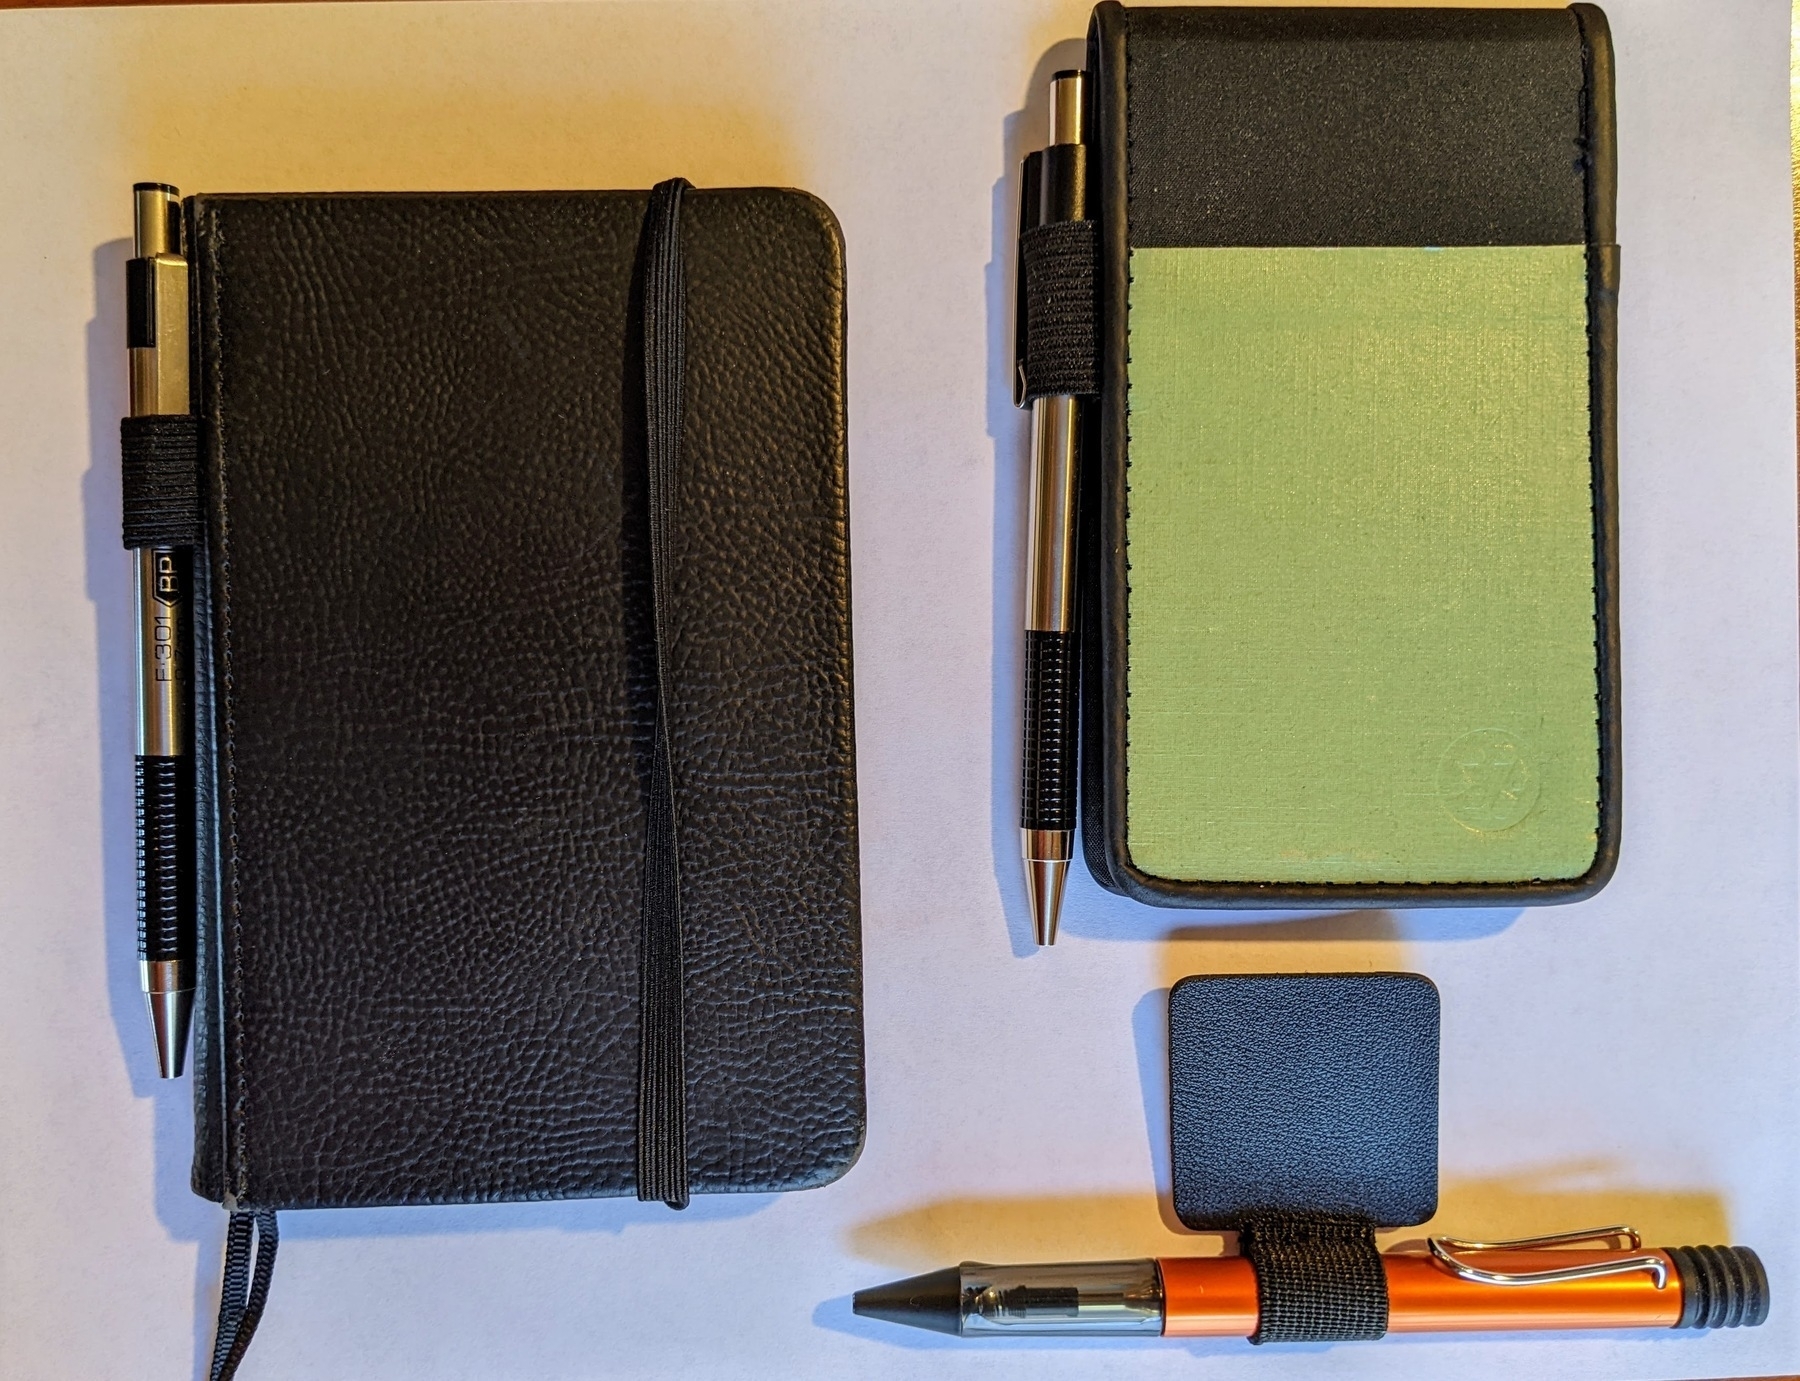 two pocket notebooks with different pen loops attached, and a free-standing pen loop with a sticky backing